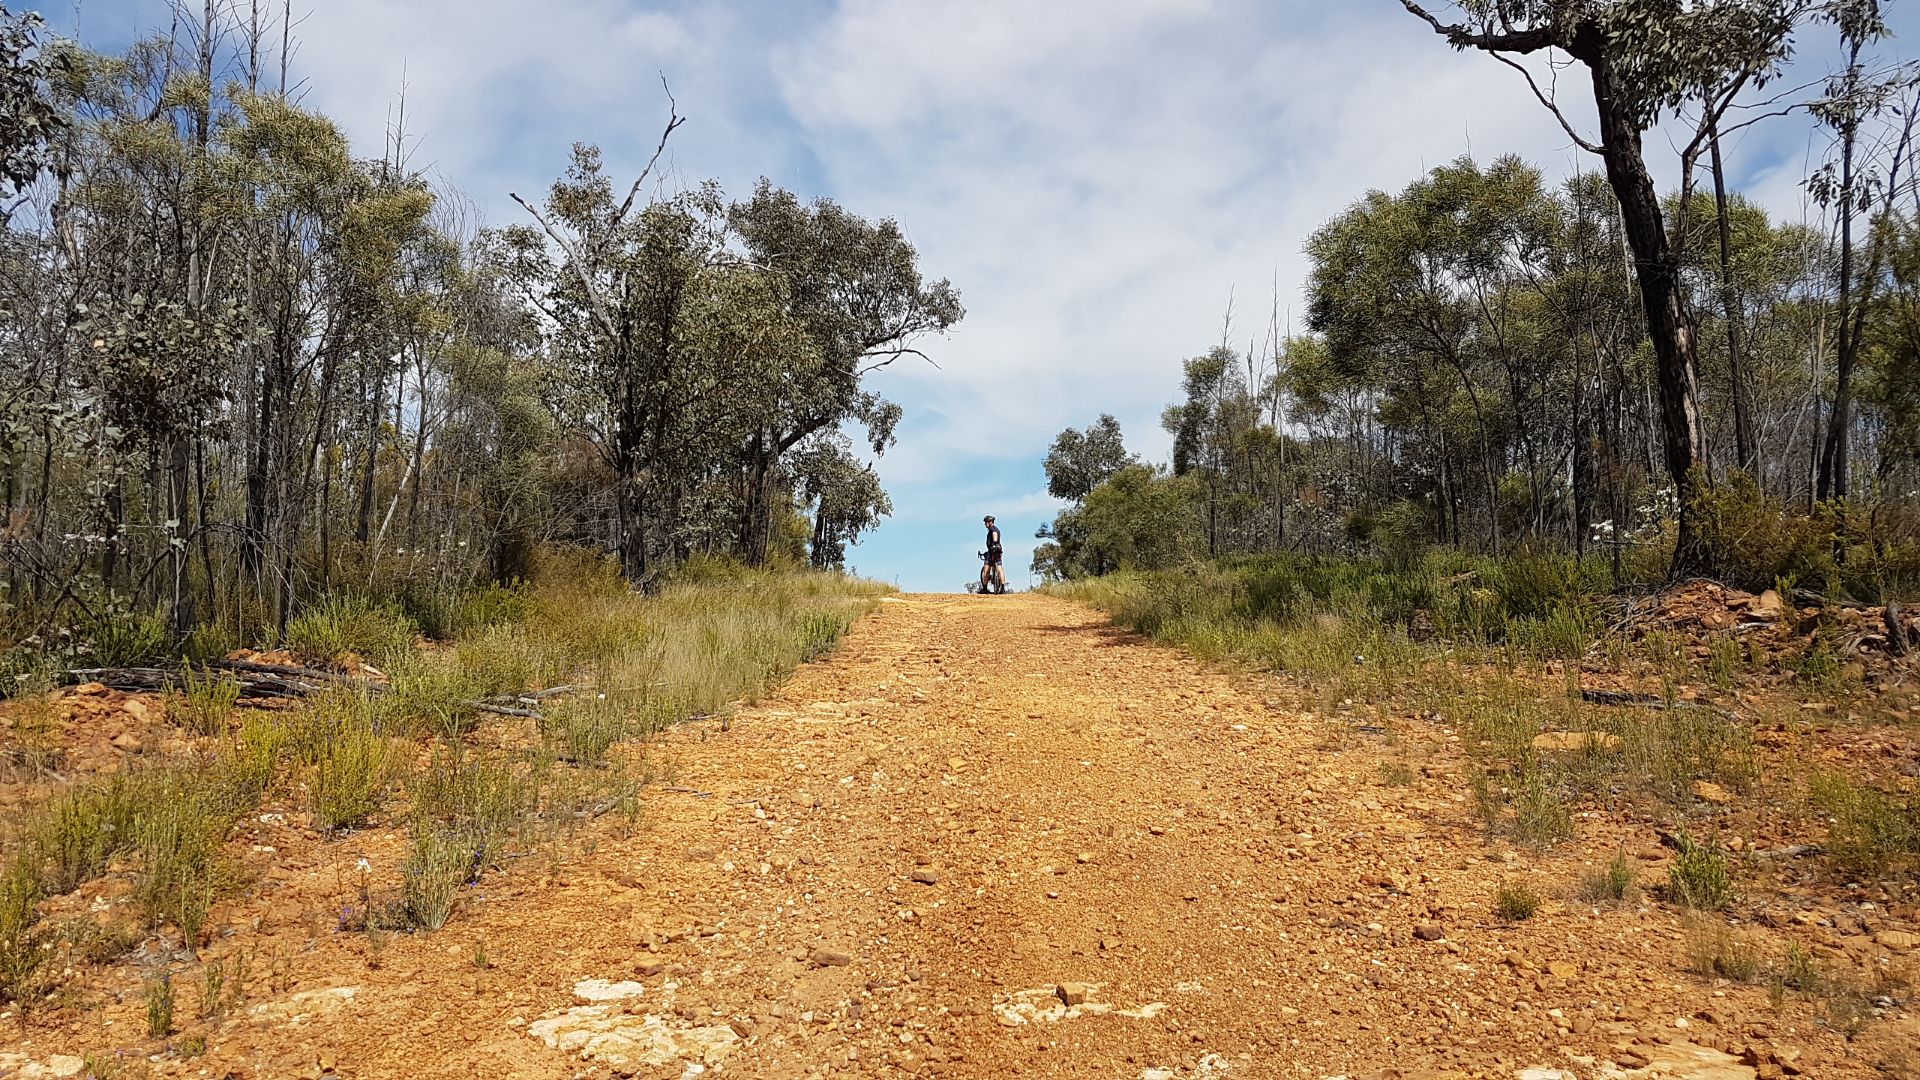 David Mark turns around while on his bike at the top of a dirt hill surrounded by bushland.